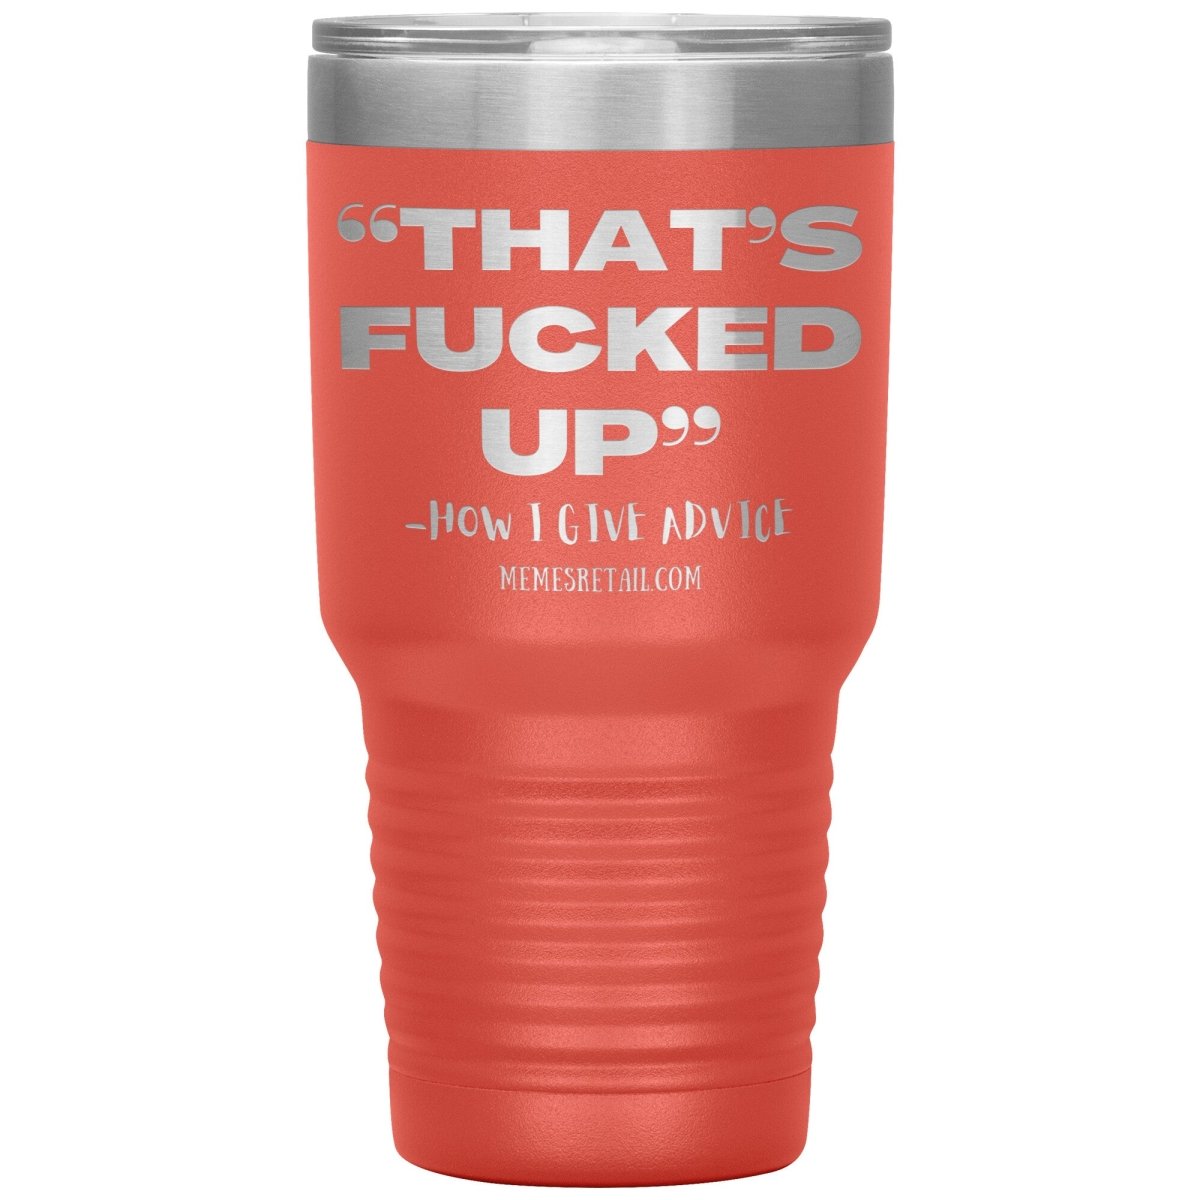 “That’s Fucked Up” -how I give advice Tumblers, 30oz Insulated Tumbler / Coral - MemesRetail.com